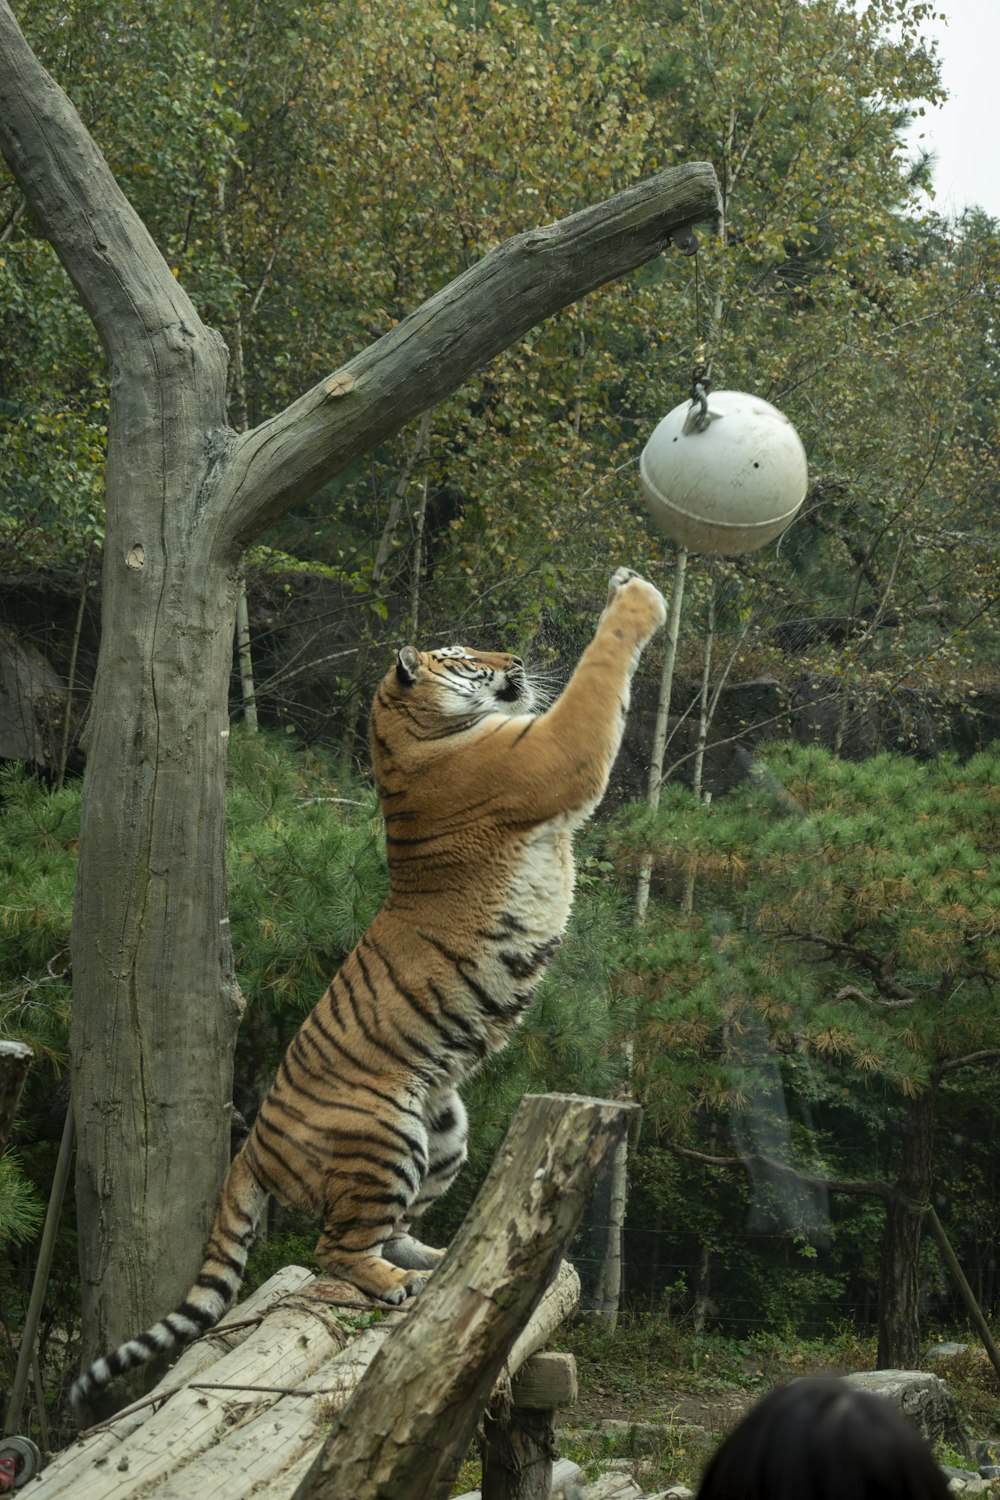 a tiger playing with a ball in a tree